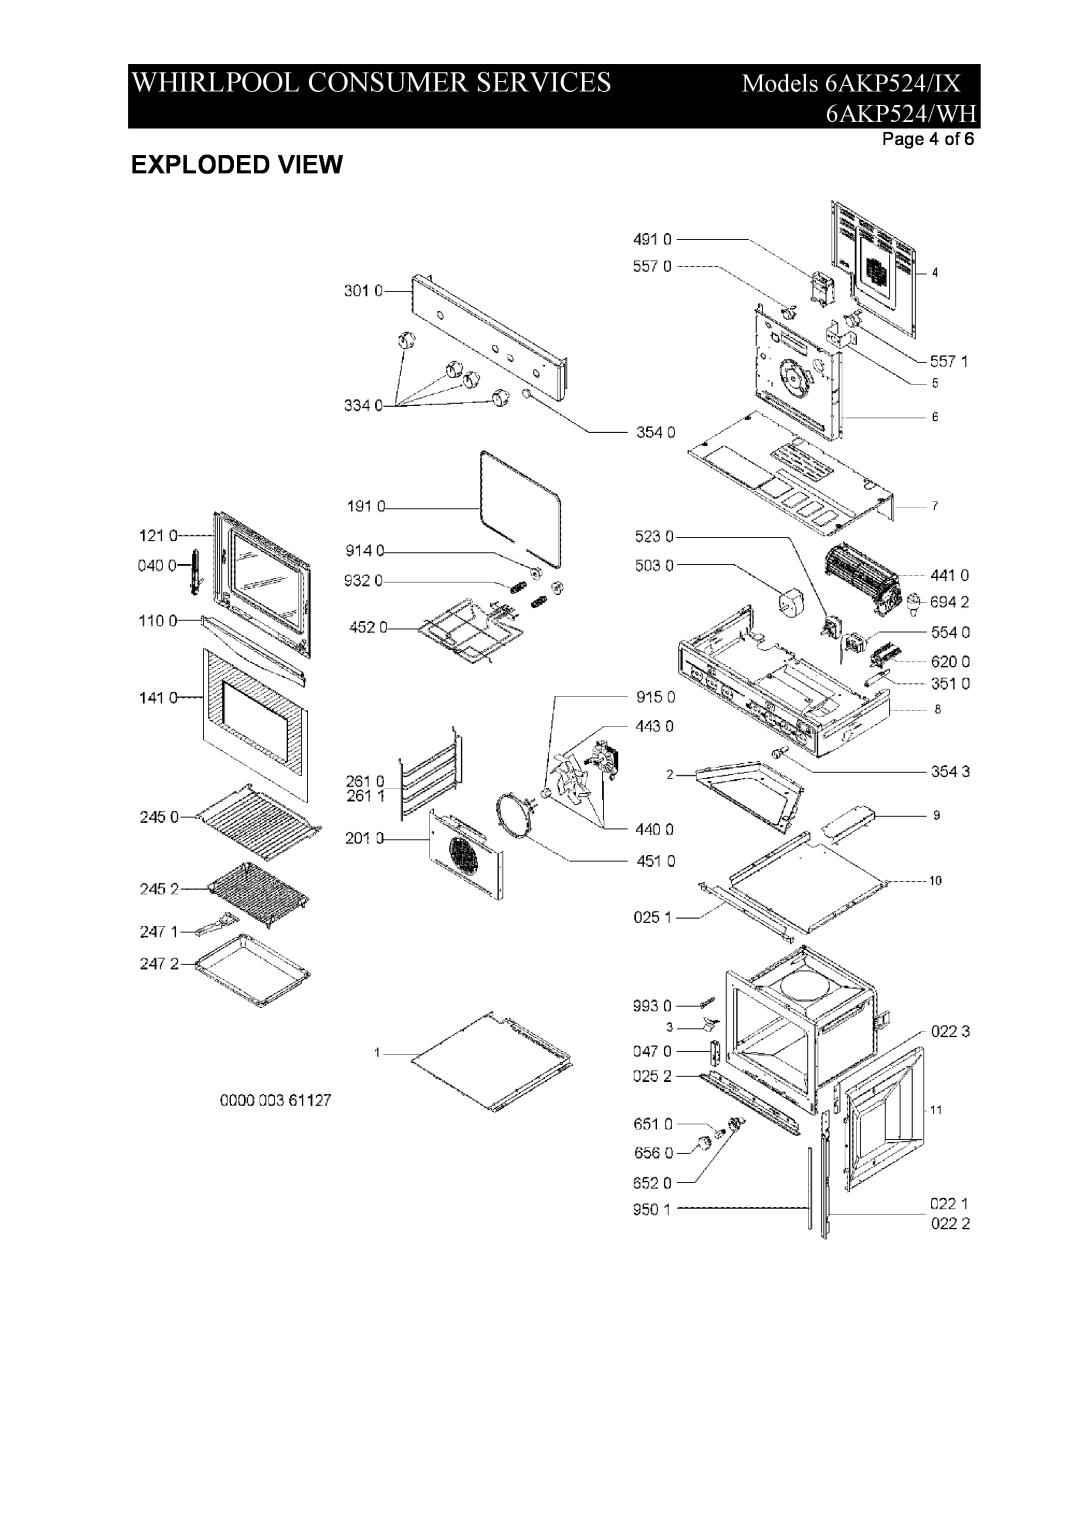 Whirlpool 6AKP524/WH service manual Whirlpool Consumer Services, Models 6AKP524/IX, Exploded View, Page 4 of 